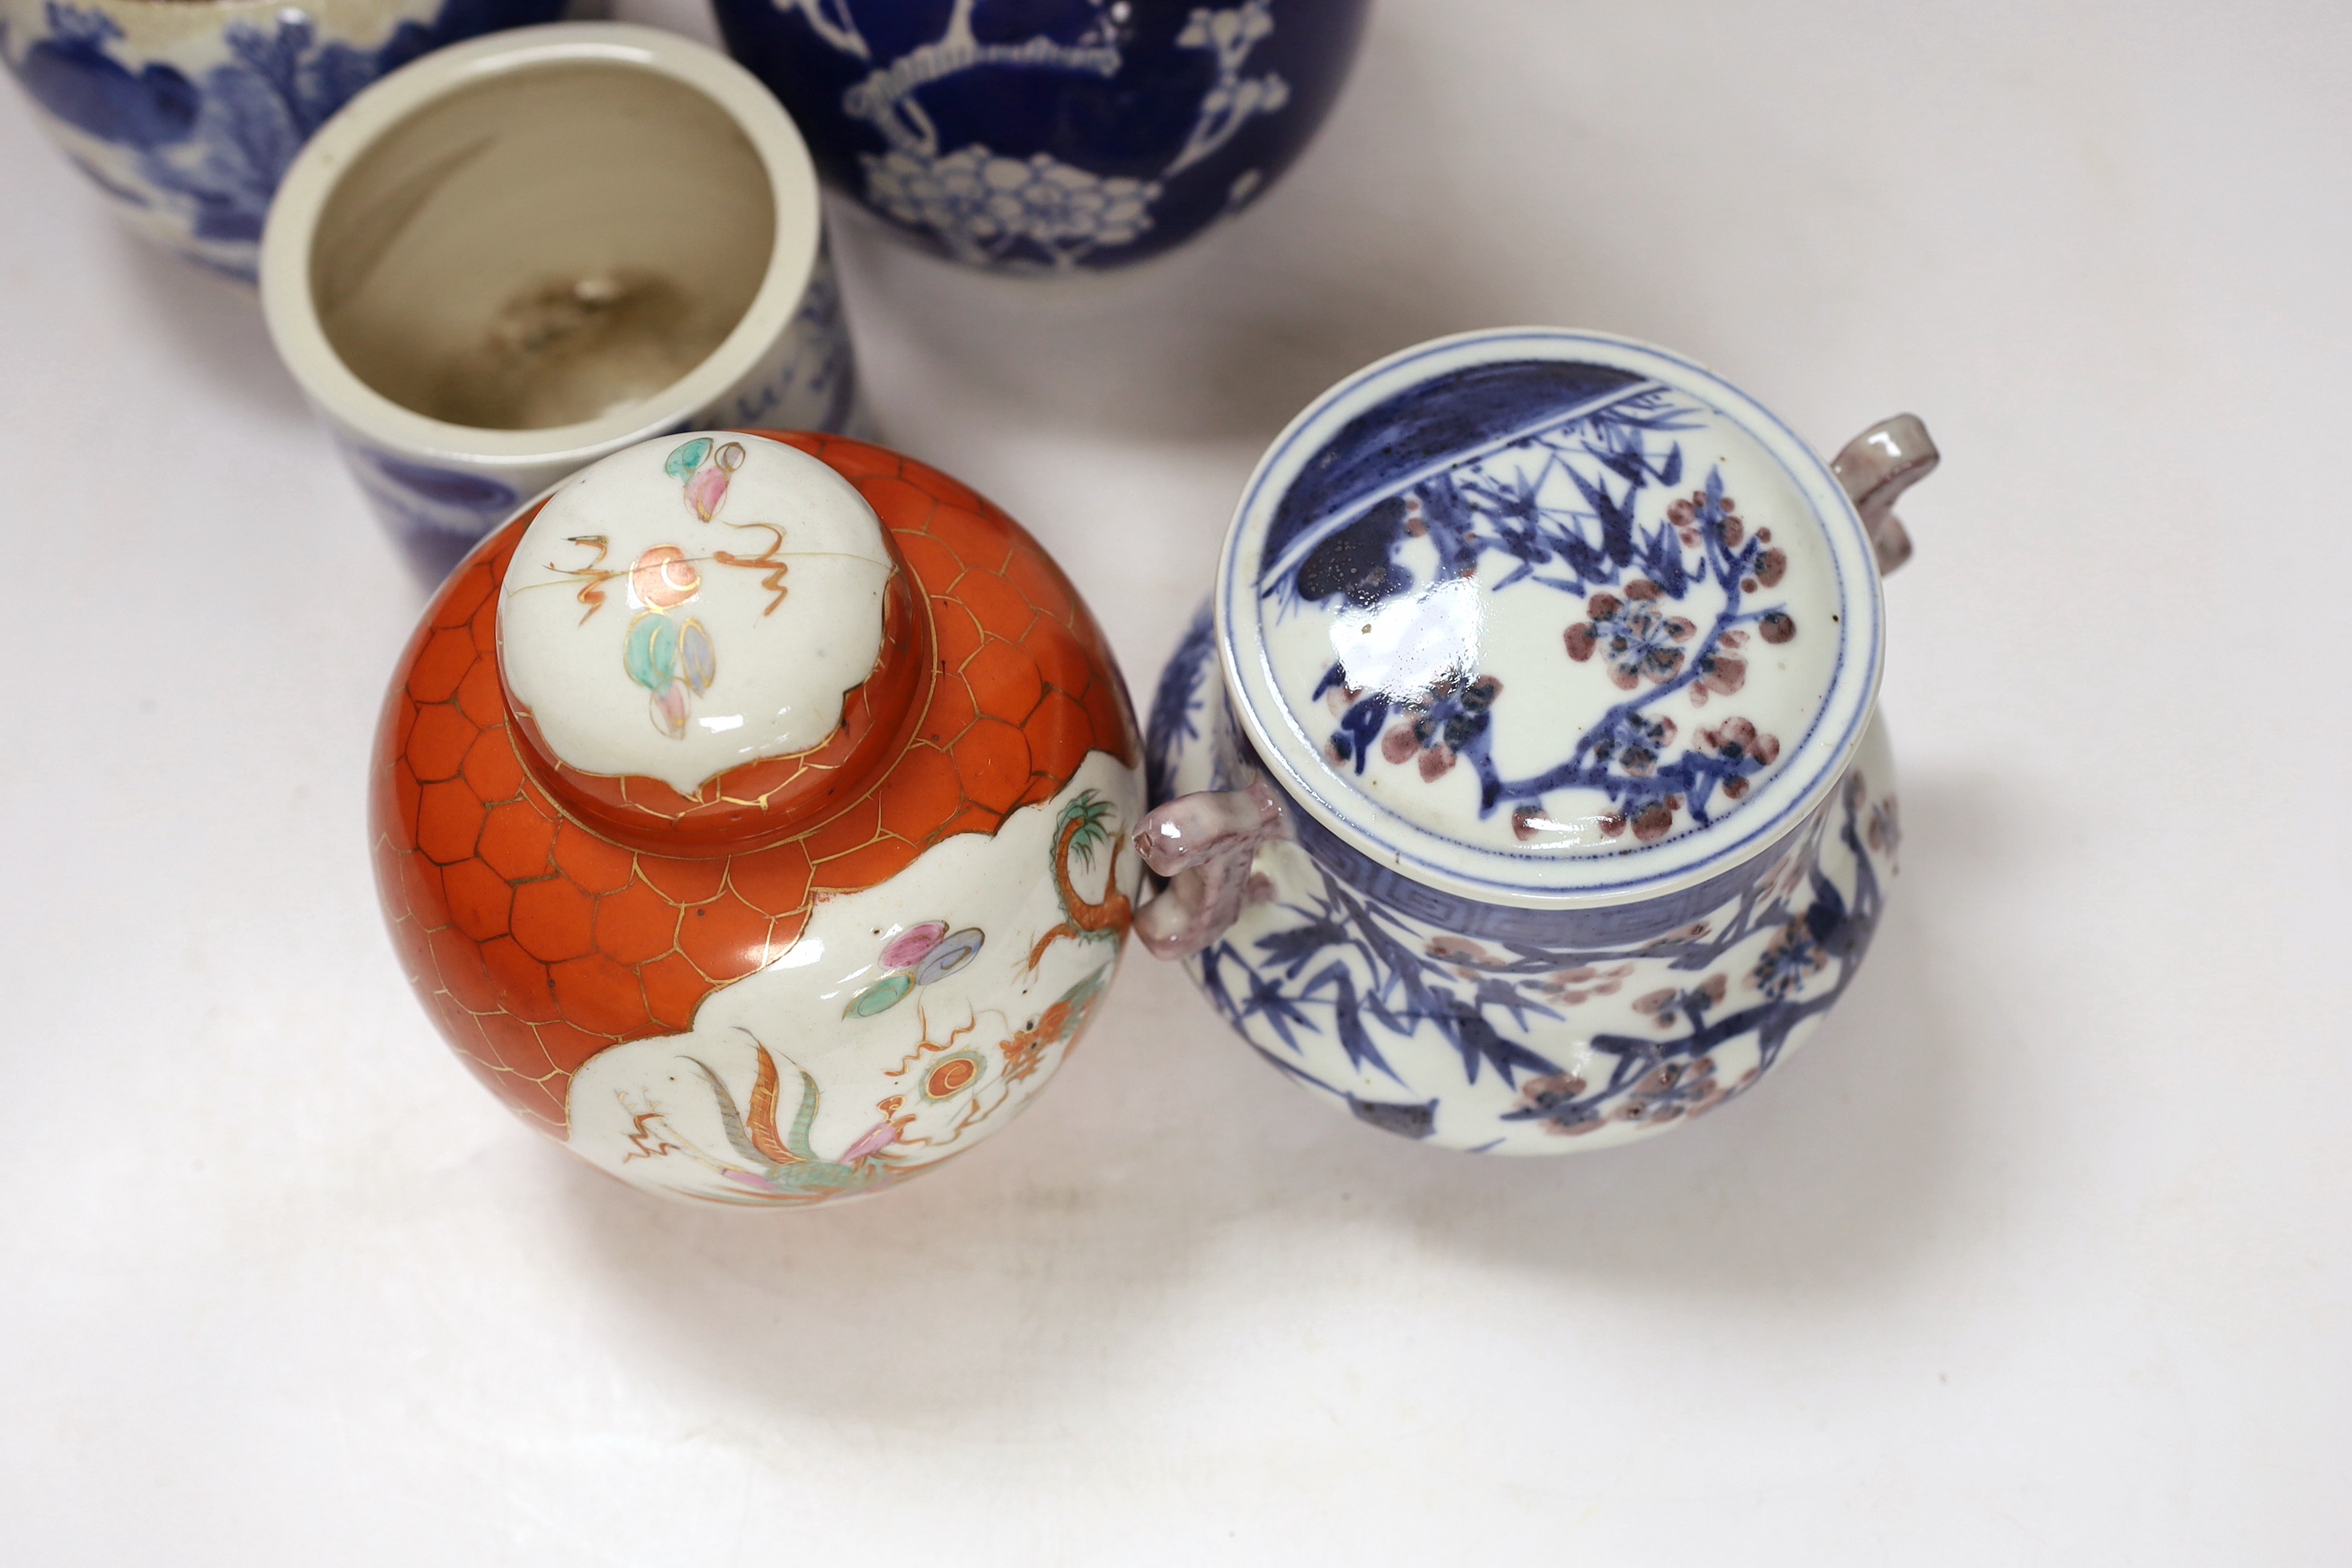 Two Chinese famille rose jars, a similar pot with cover, a brush pot and a vase, 18th century and later, tallest 24cm (5)